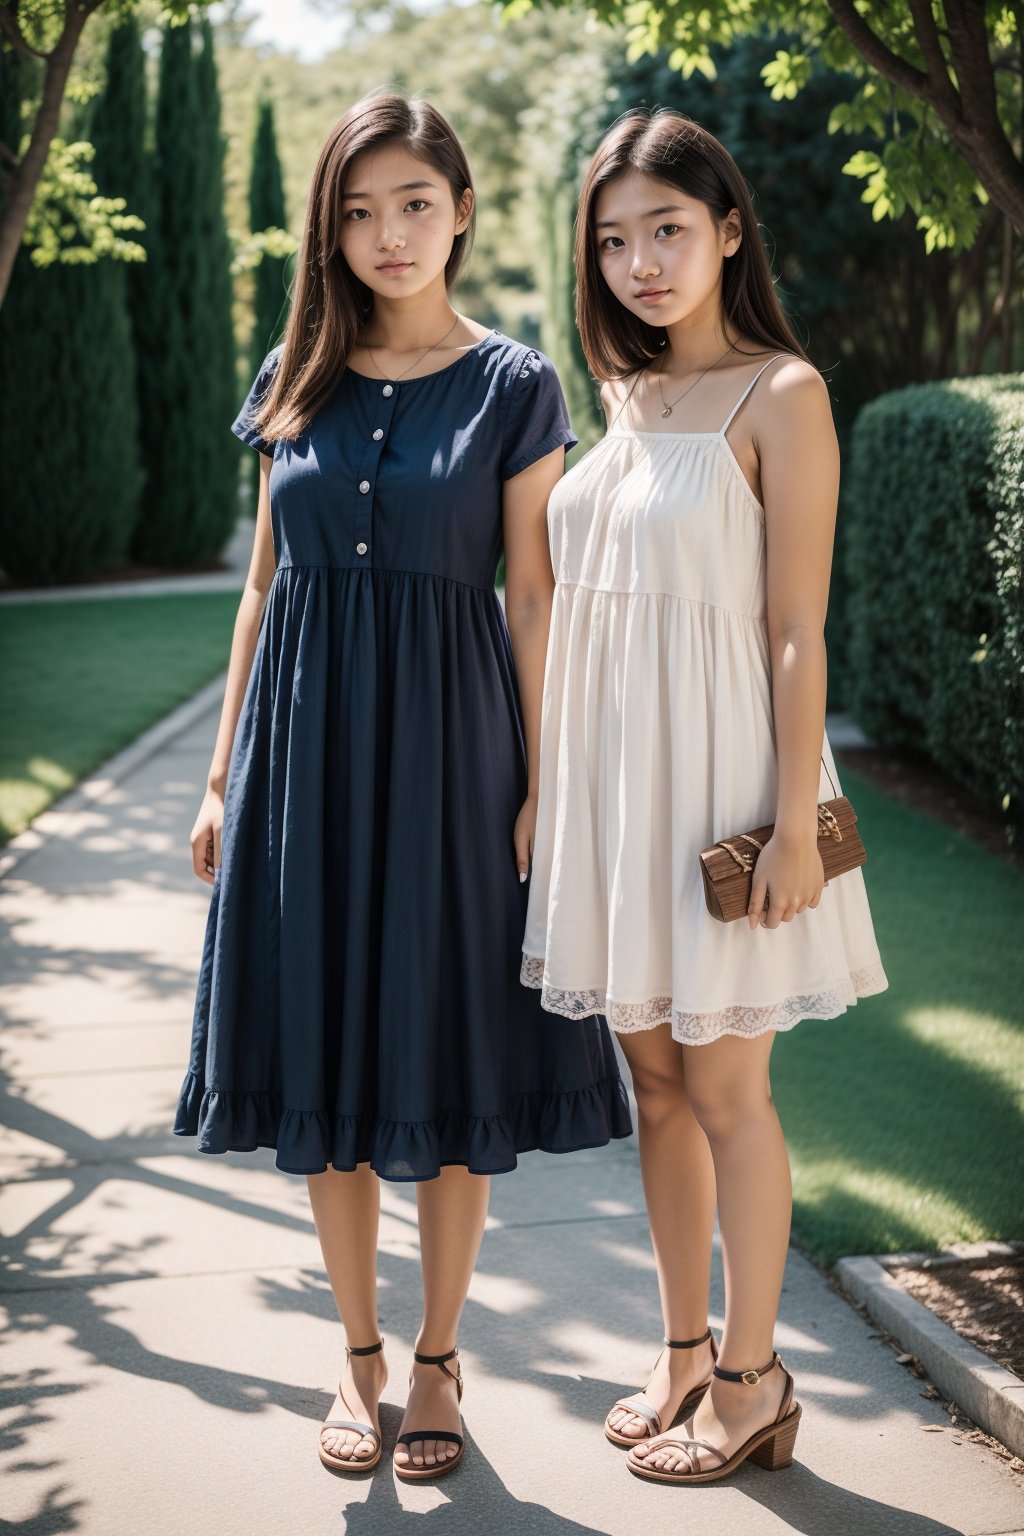 A 16 years old girl, baby dress, standing next to her mother, under the sunlight 